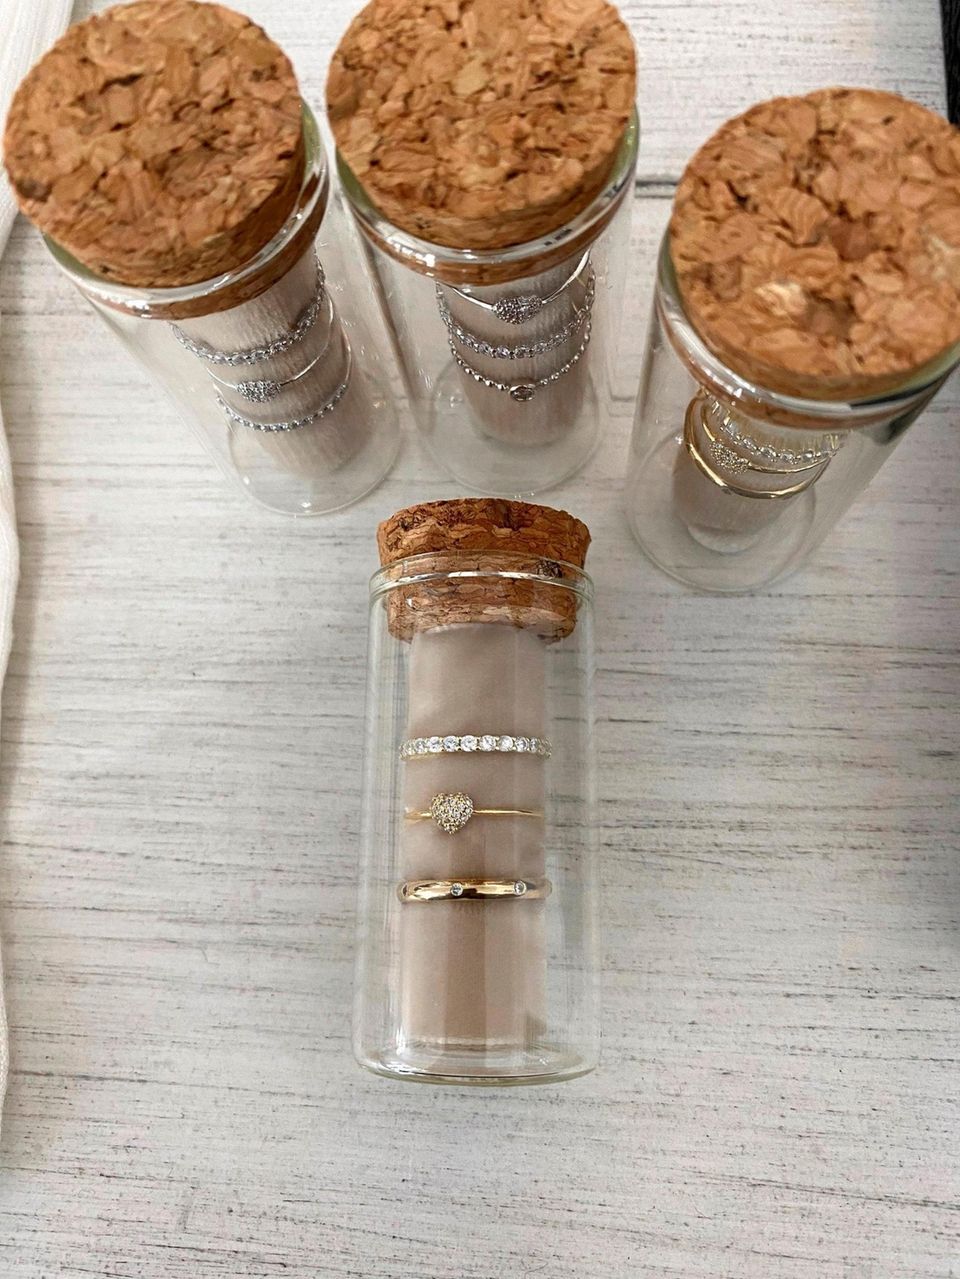 Send a message in a cork-topped bottle with